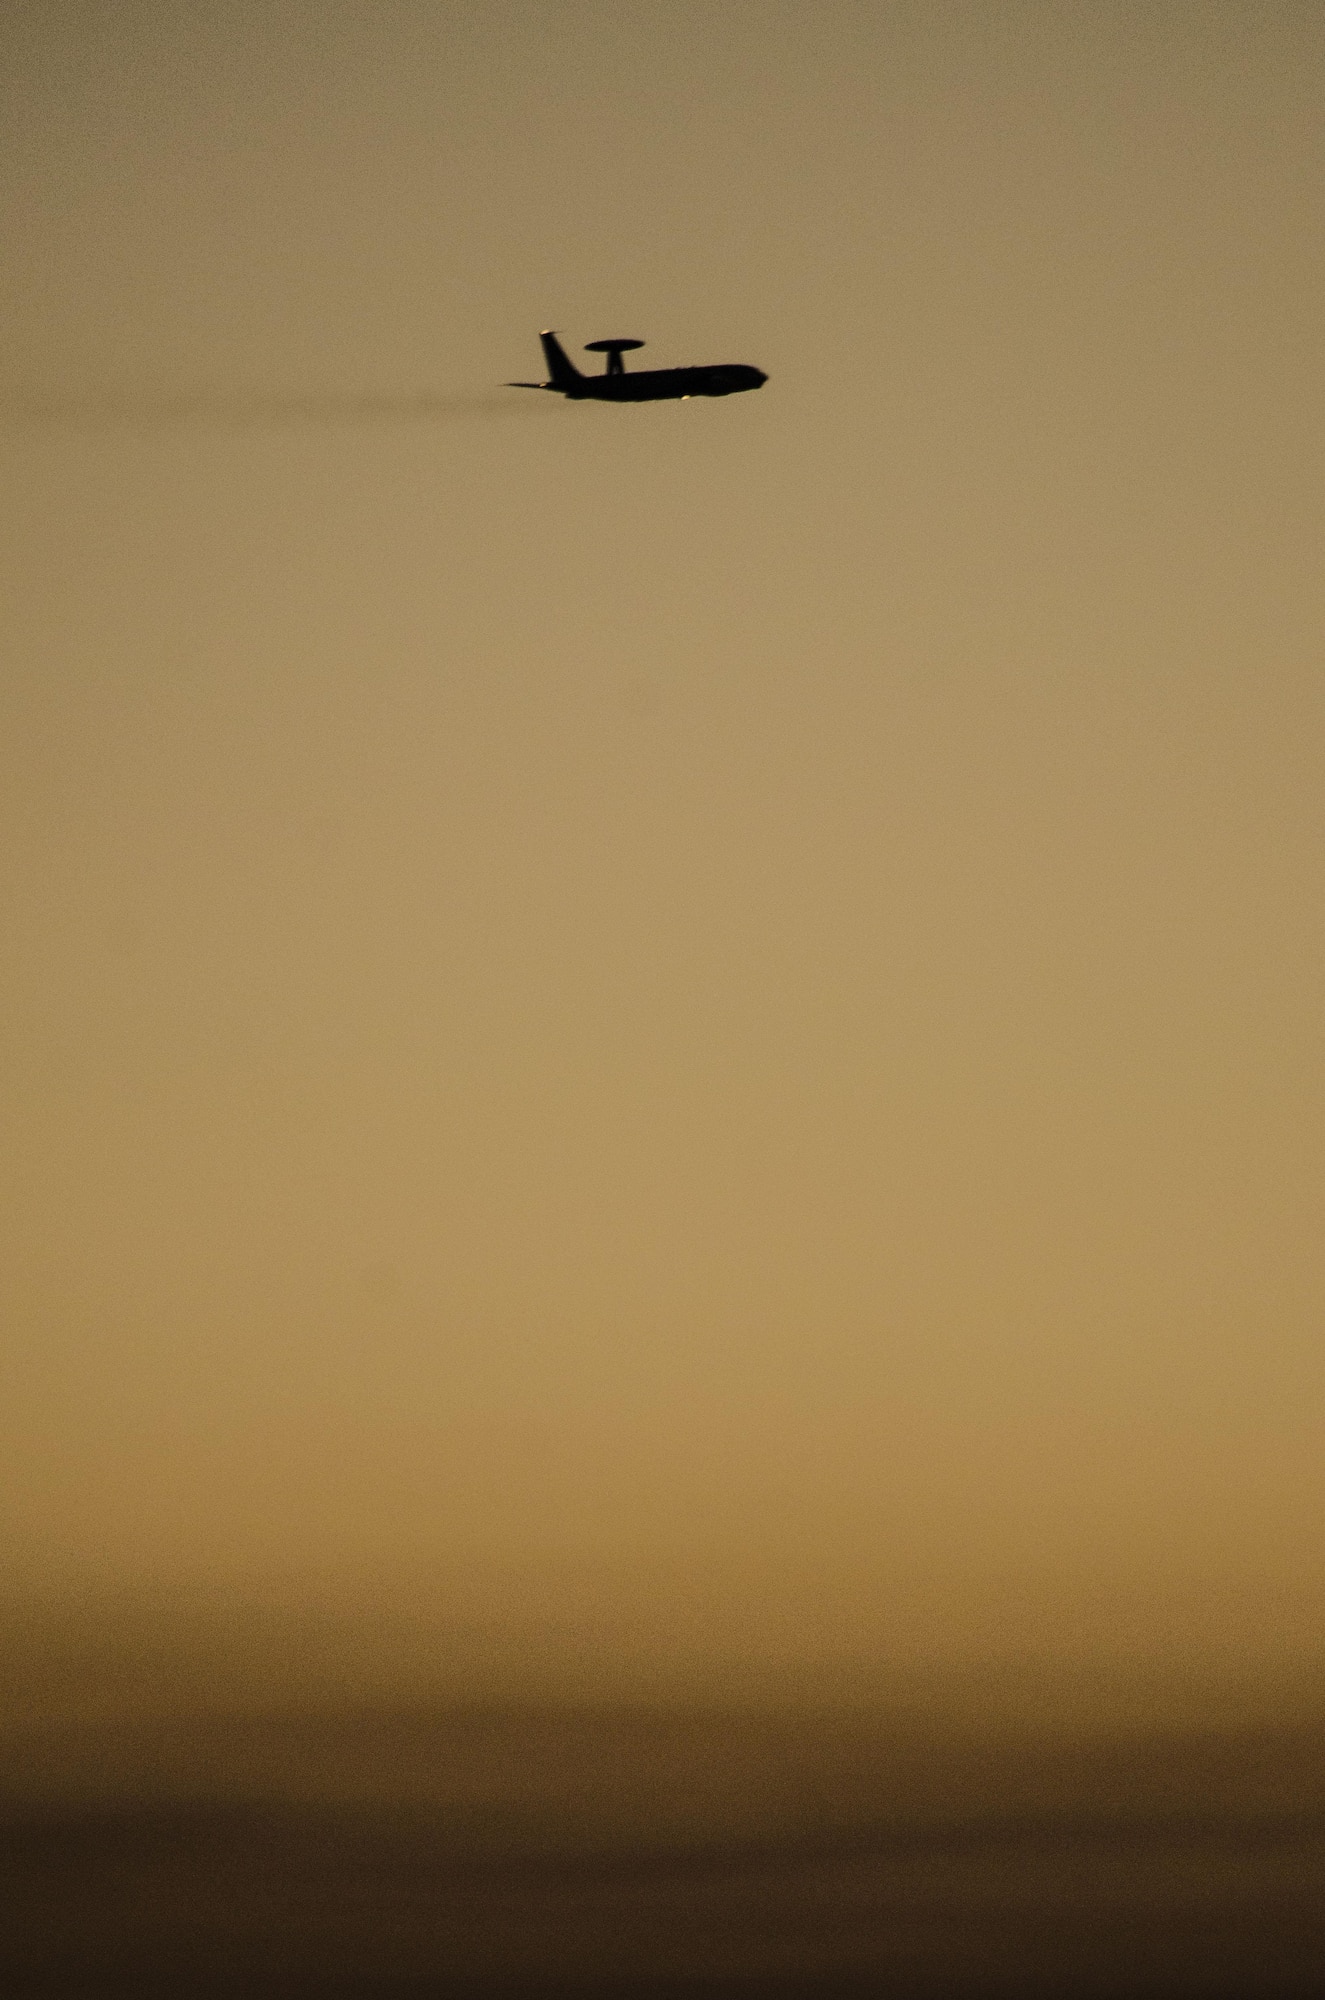 An E-3 Sentry assigned to the 965th Airborne Air Control Squadron, Tinker Air Force Base, Okla., flies at sunset during exercise Red Flag 16-4 at Nellis AFB, Nev., Aug. 17, 2016. The E-3 is a command and control battle management platform with a surveillance mission. (U. S. Air Force photo by Tech. Sgt. Frank Miller)